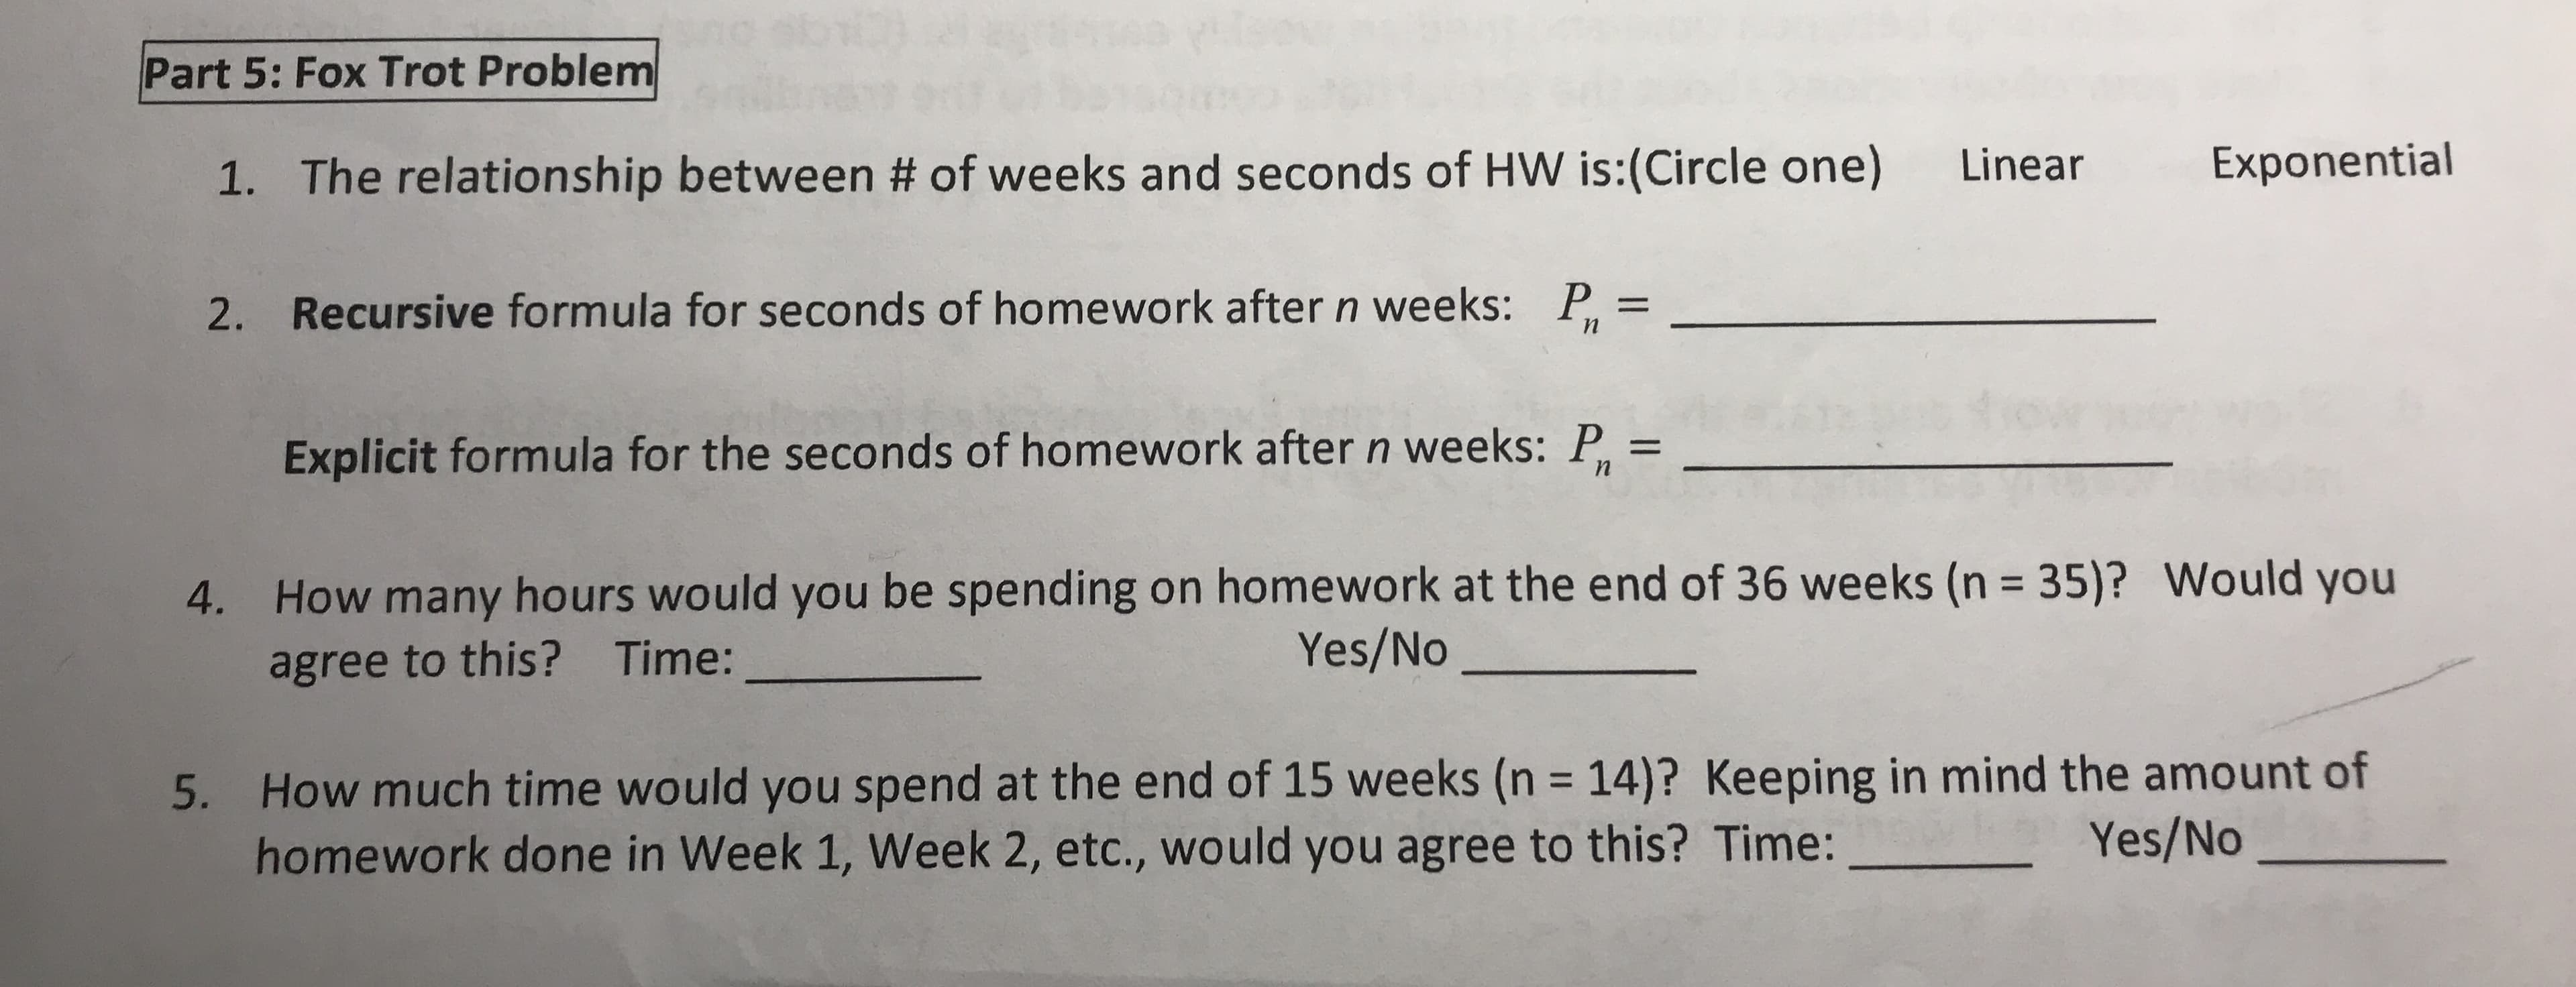 Part 5: Fox Trot Problem
Exponential
Linear
1. The relationship between # of weeks and seconds of HW is:(Circle one)
P, =
Recursive formula for seconds of homework after n weeks:
2.
Explicit formula for the seconds of homework after n weeks: P, =
How many hours would you be spending on homework at the end of 36 weeks (n = 35)? Would you
Yes/No
4.
Time:
agree to this?
5. How much time would you spend at the end of 15 weeks (n = 14)? Keeping in mind the amount of
homework done in Week 1, Week 2, etc., would you agree to this? Time:
%3D
Yes/No
